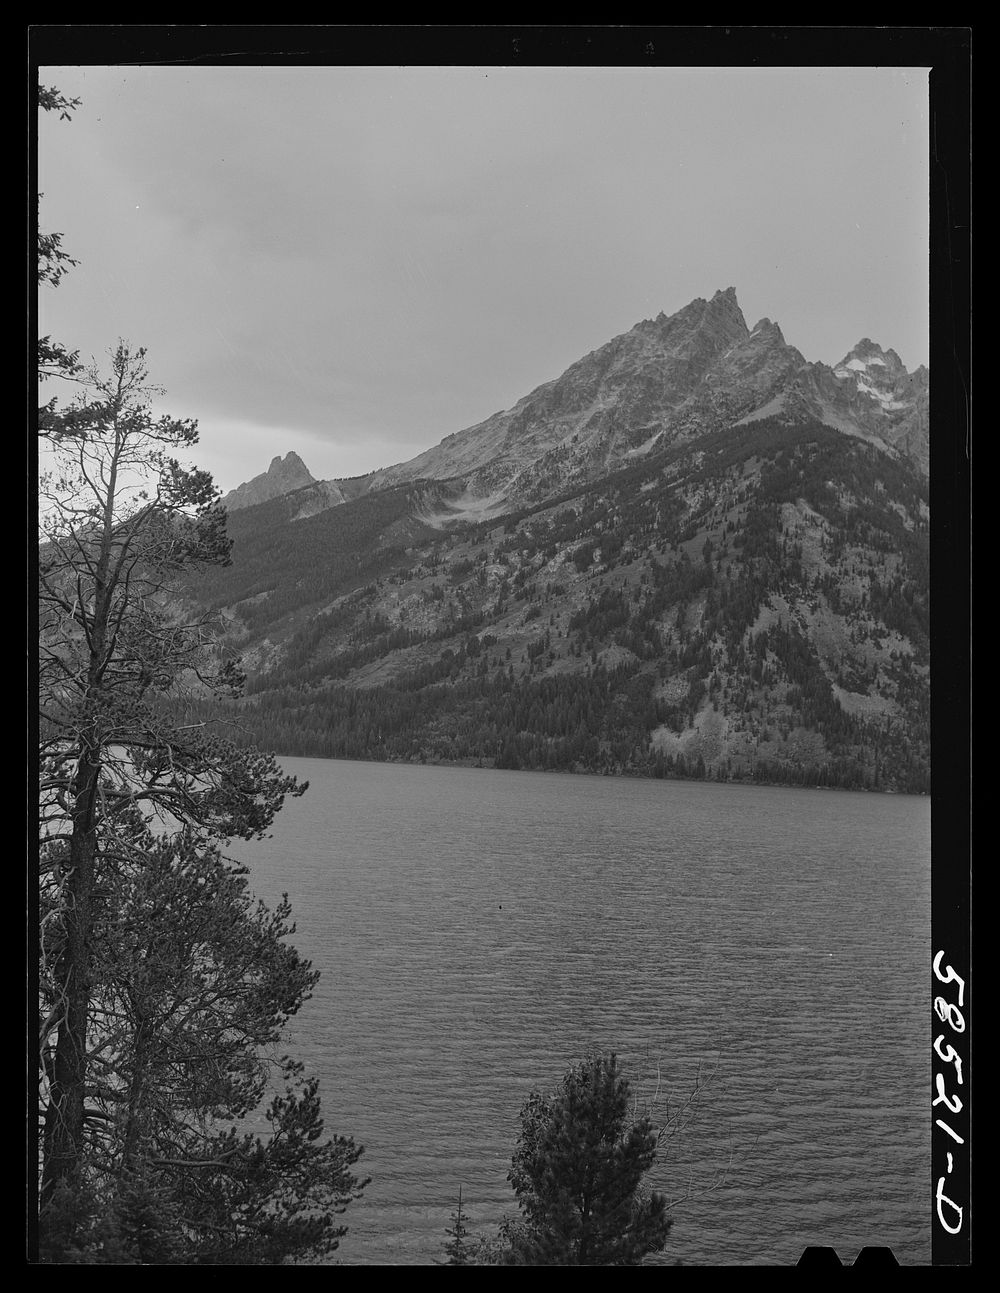 [Untitled photo, possibly related to: Grand Teton National Park, Wyoming]. Sourced from the Library of Congress.